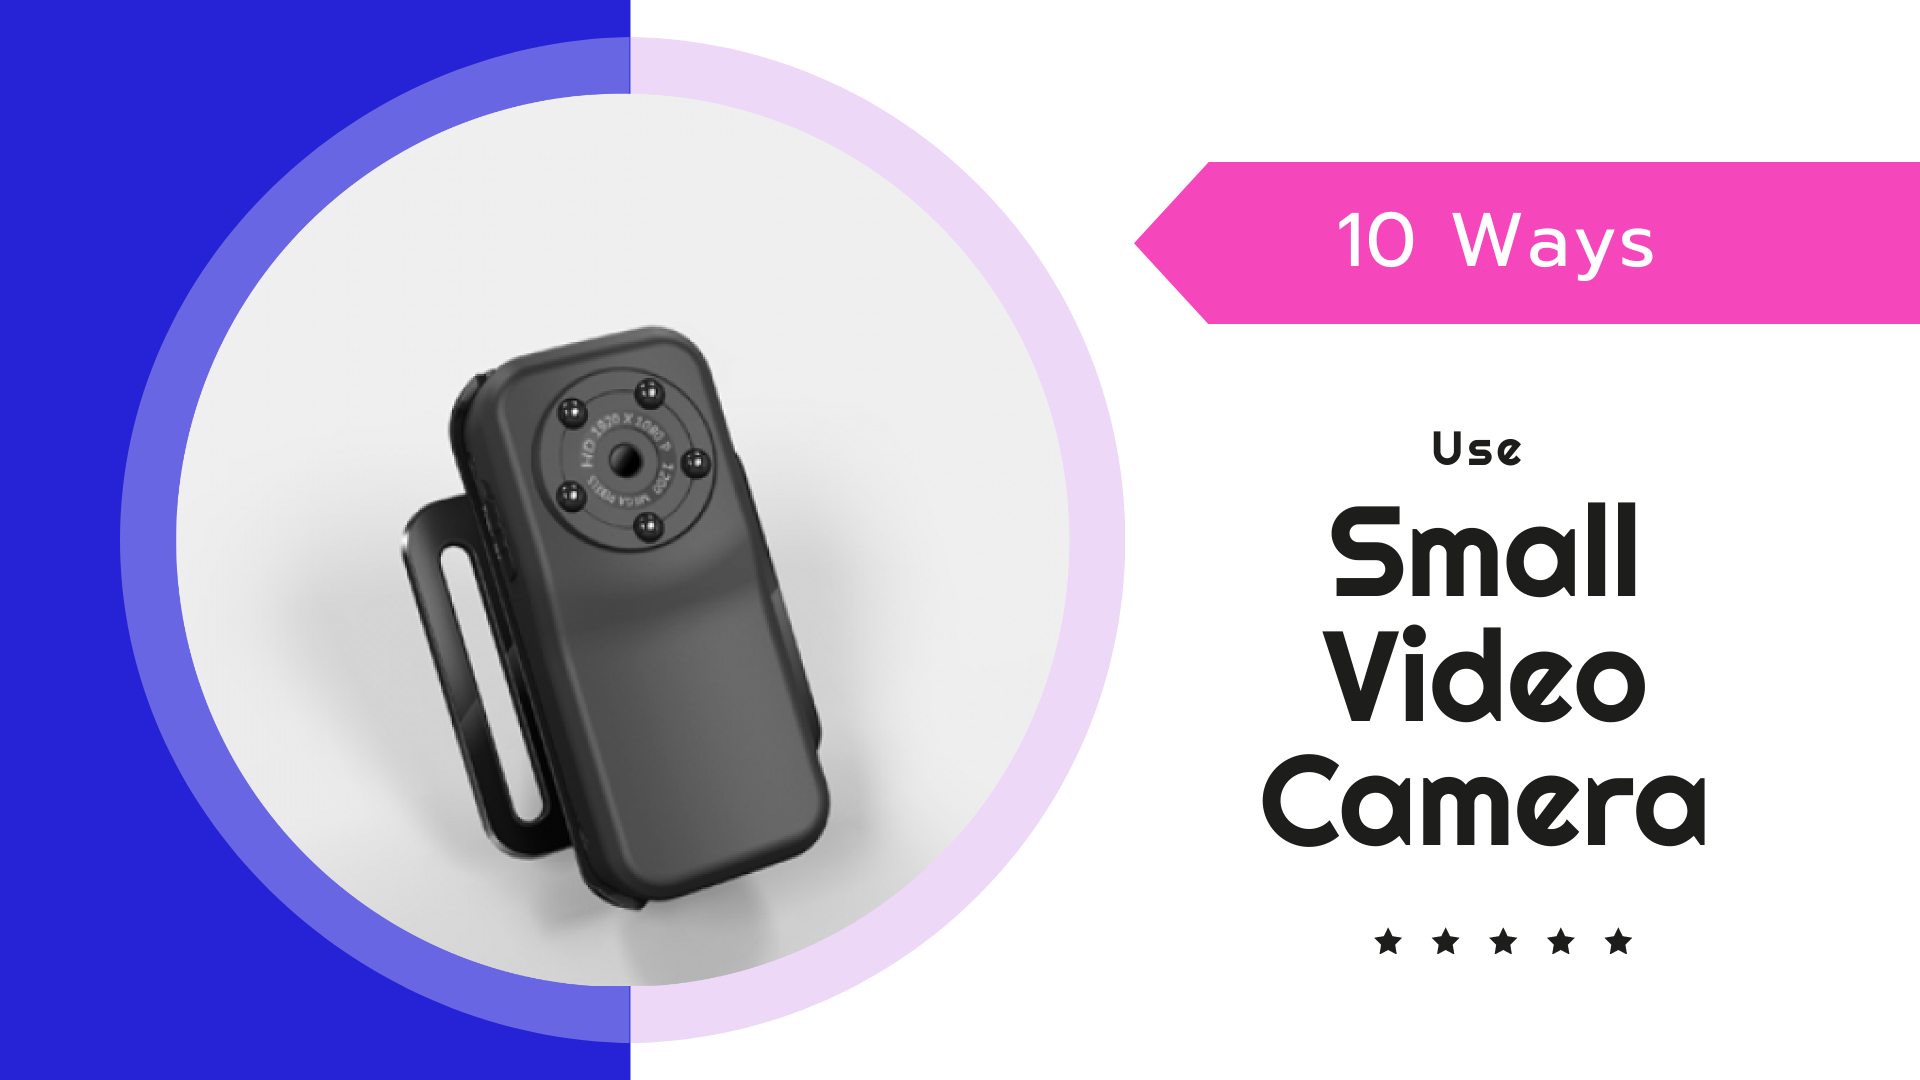 20 Ways To Use Small Video Camera For Incredible Benefits